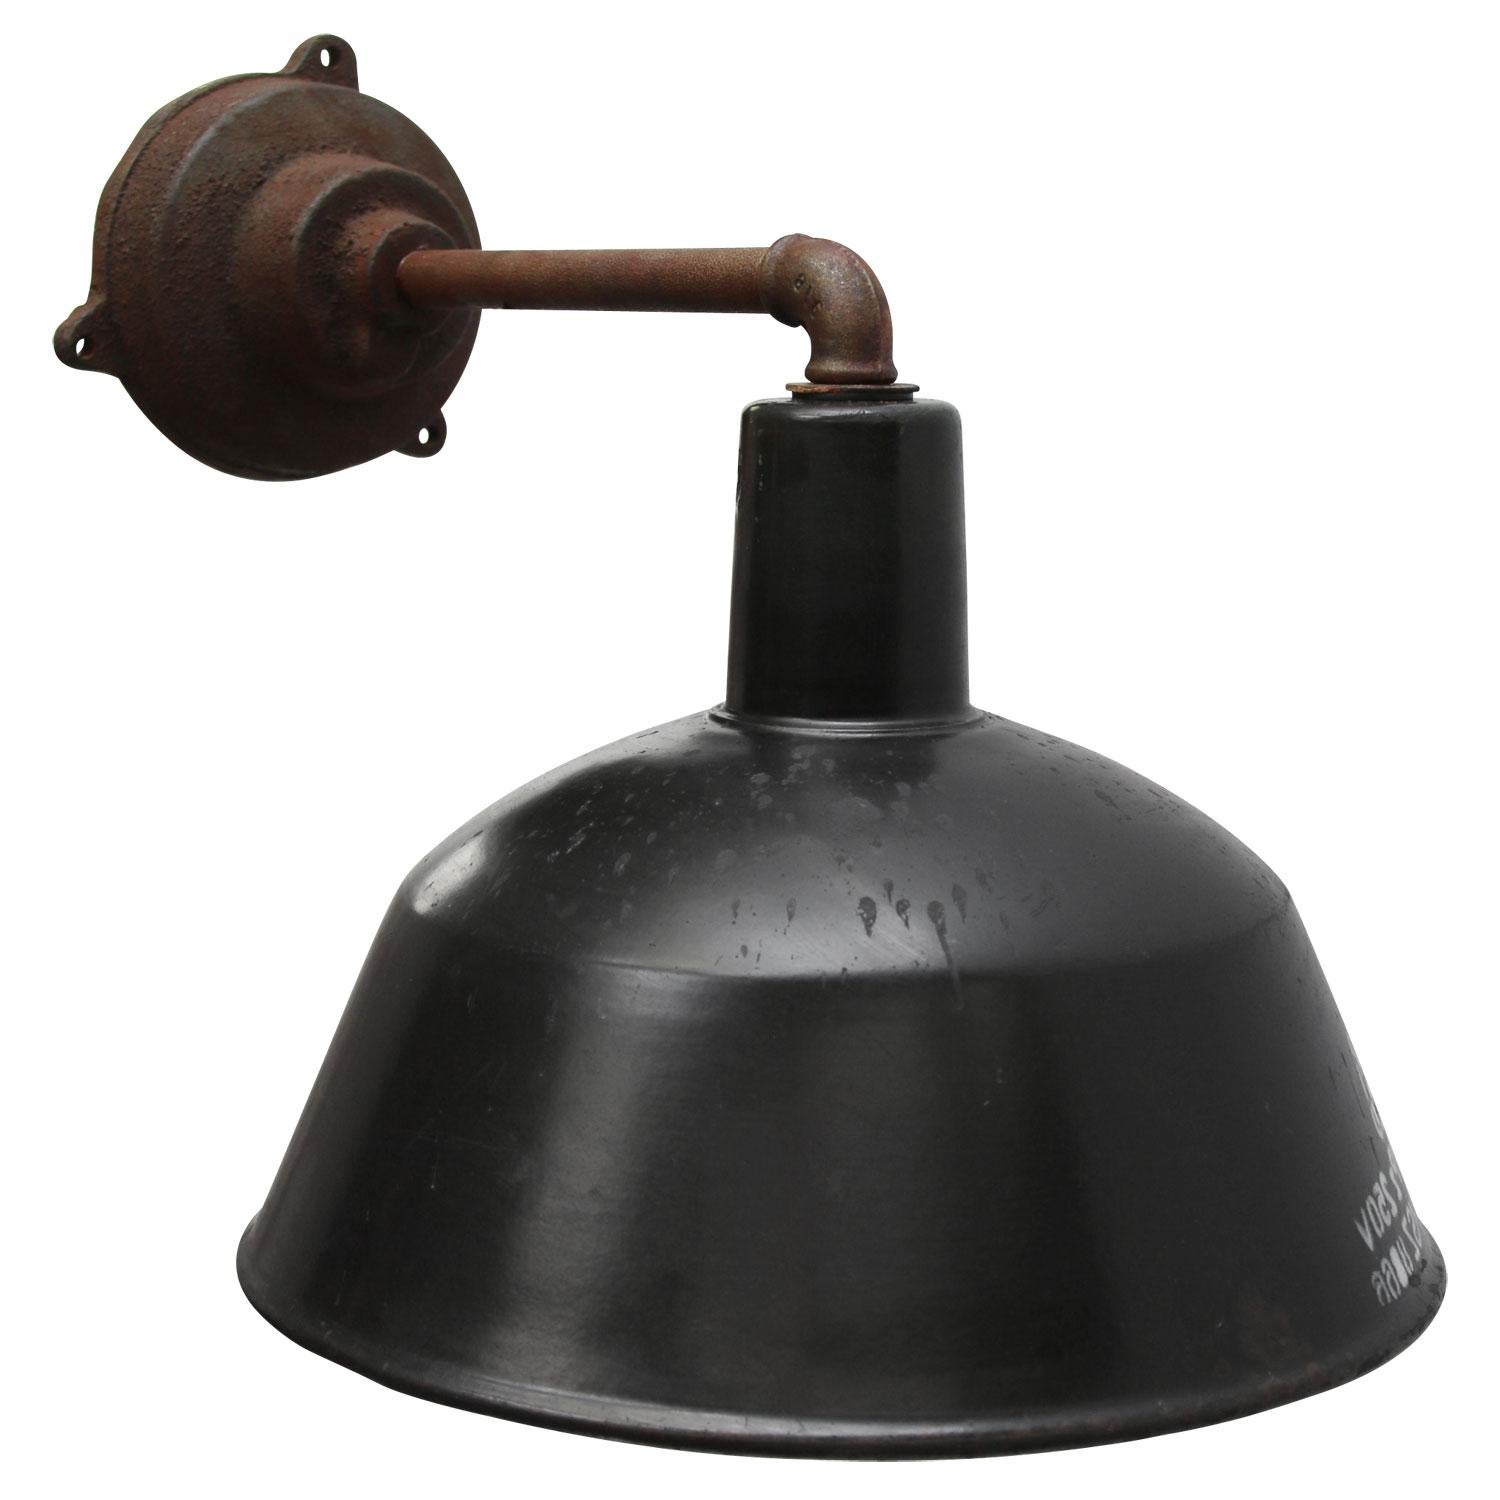 Factory wall light. Black enamel. White interior.
Diameter cast iron wall piece: 12 cm, three holes to secure. 

Weight: 3.10 kg / 6.8 lb

Priced per individual item. All lamps have been made suitable by international standards for incandescent